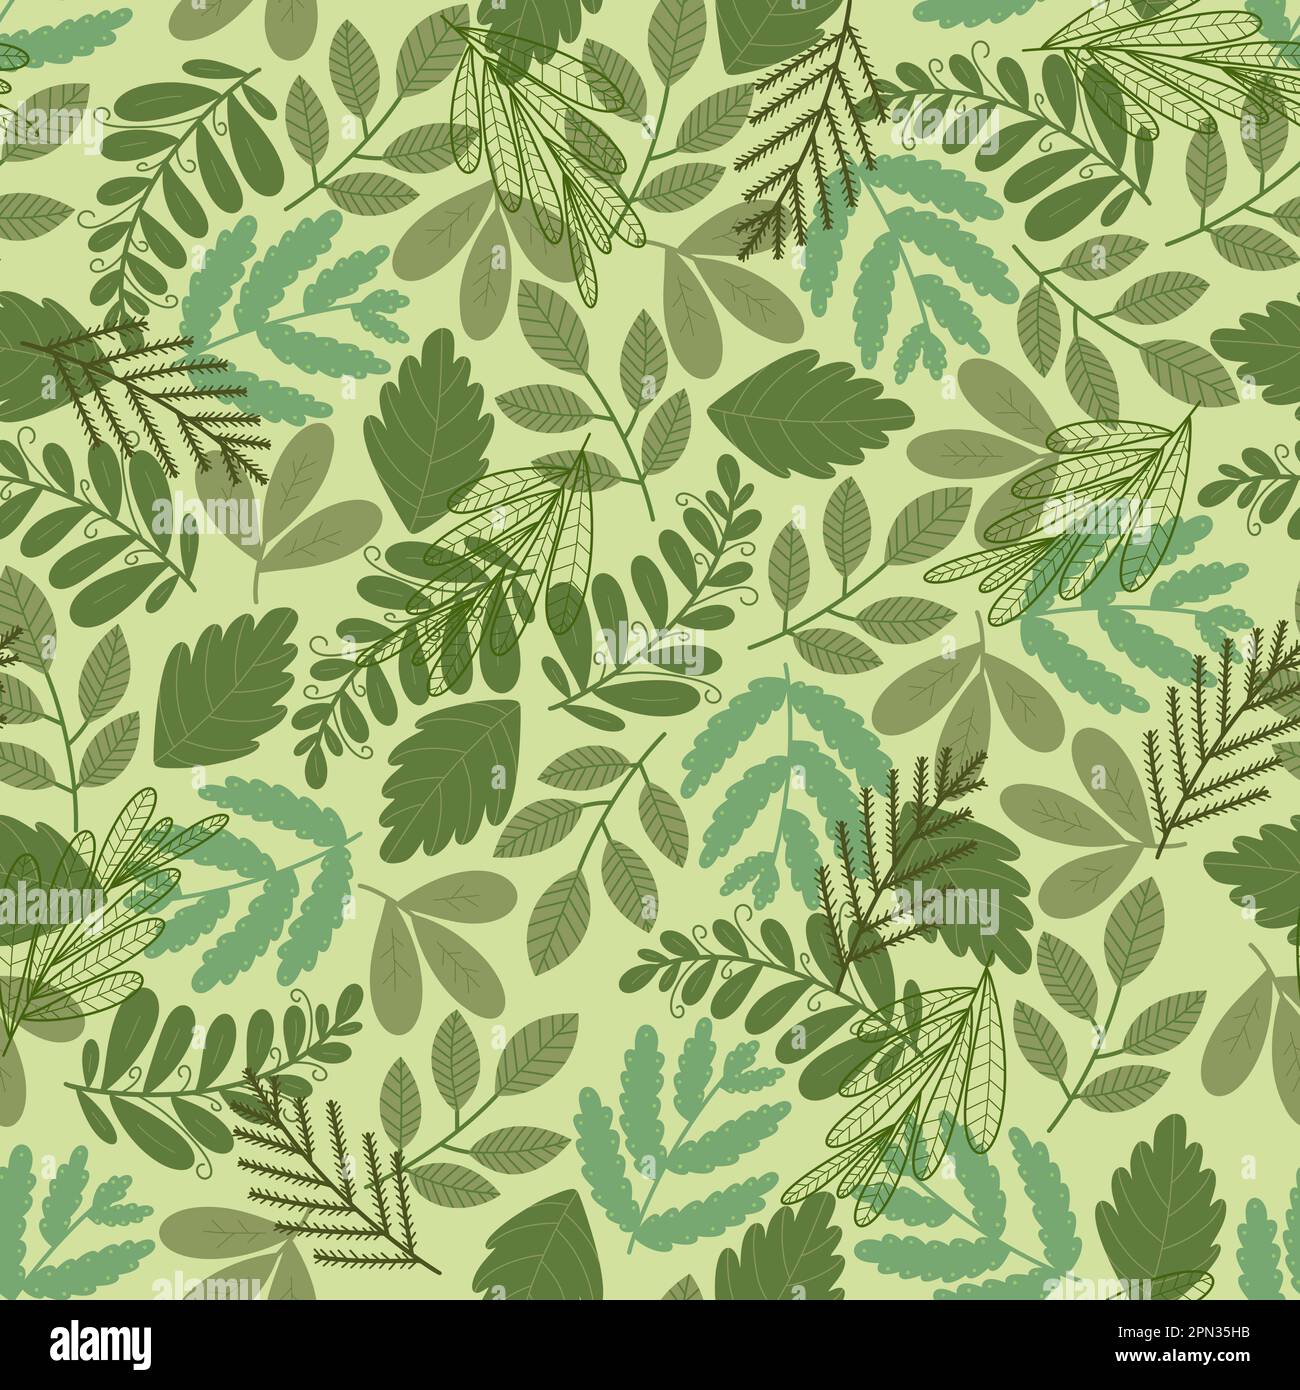 Herbal seamless pattern. Brunches and leaves silhouettes on green background. Spring leafy all over print Stock Photo